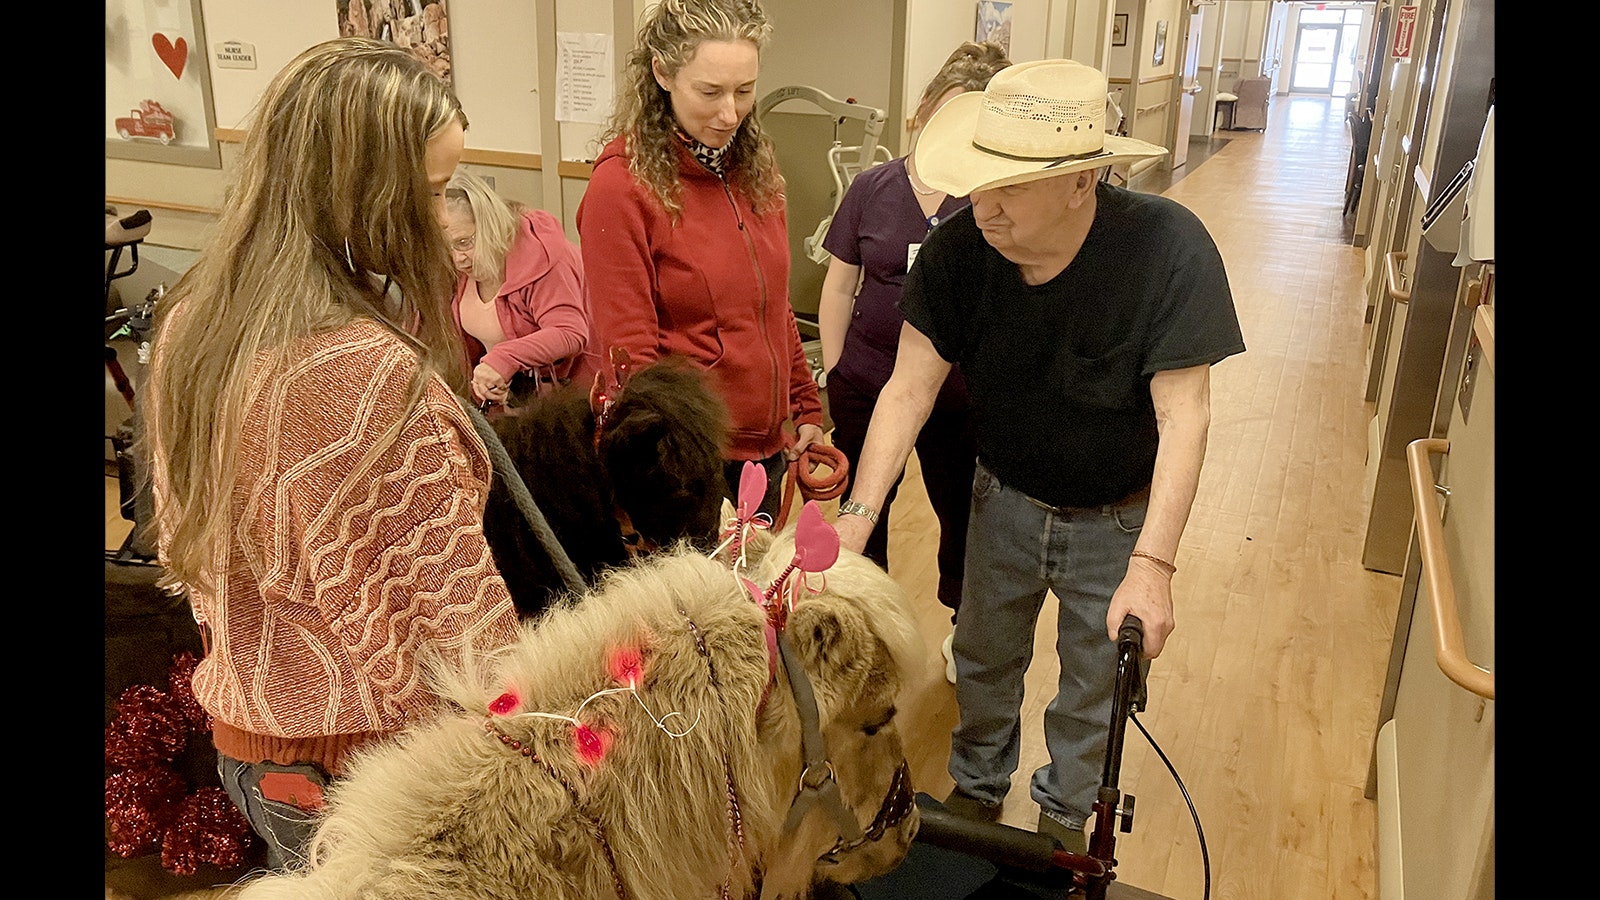 Carl Swedelius enjoys checking out the visitors to Amie Holt Care Center on Monday. He asked if Tootsie Roll and Chip were used as pack animals.